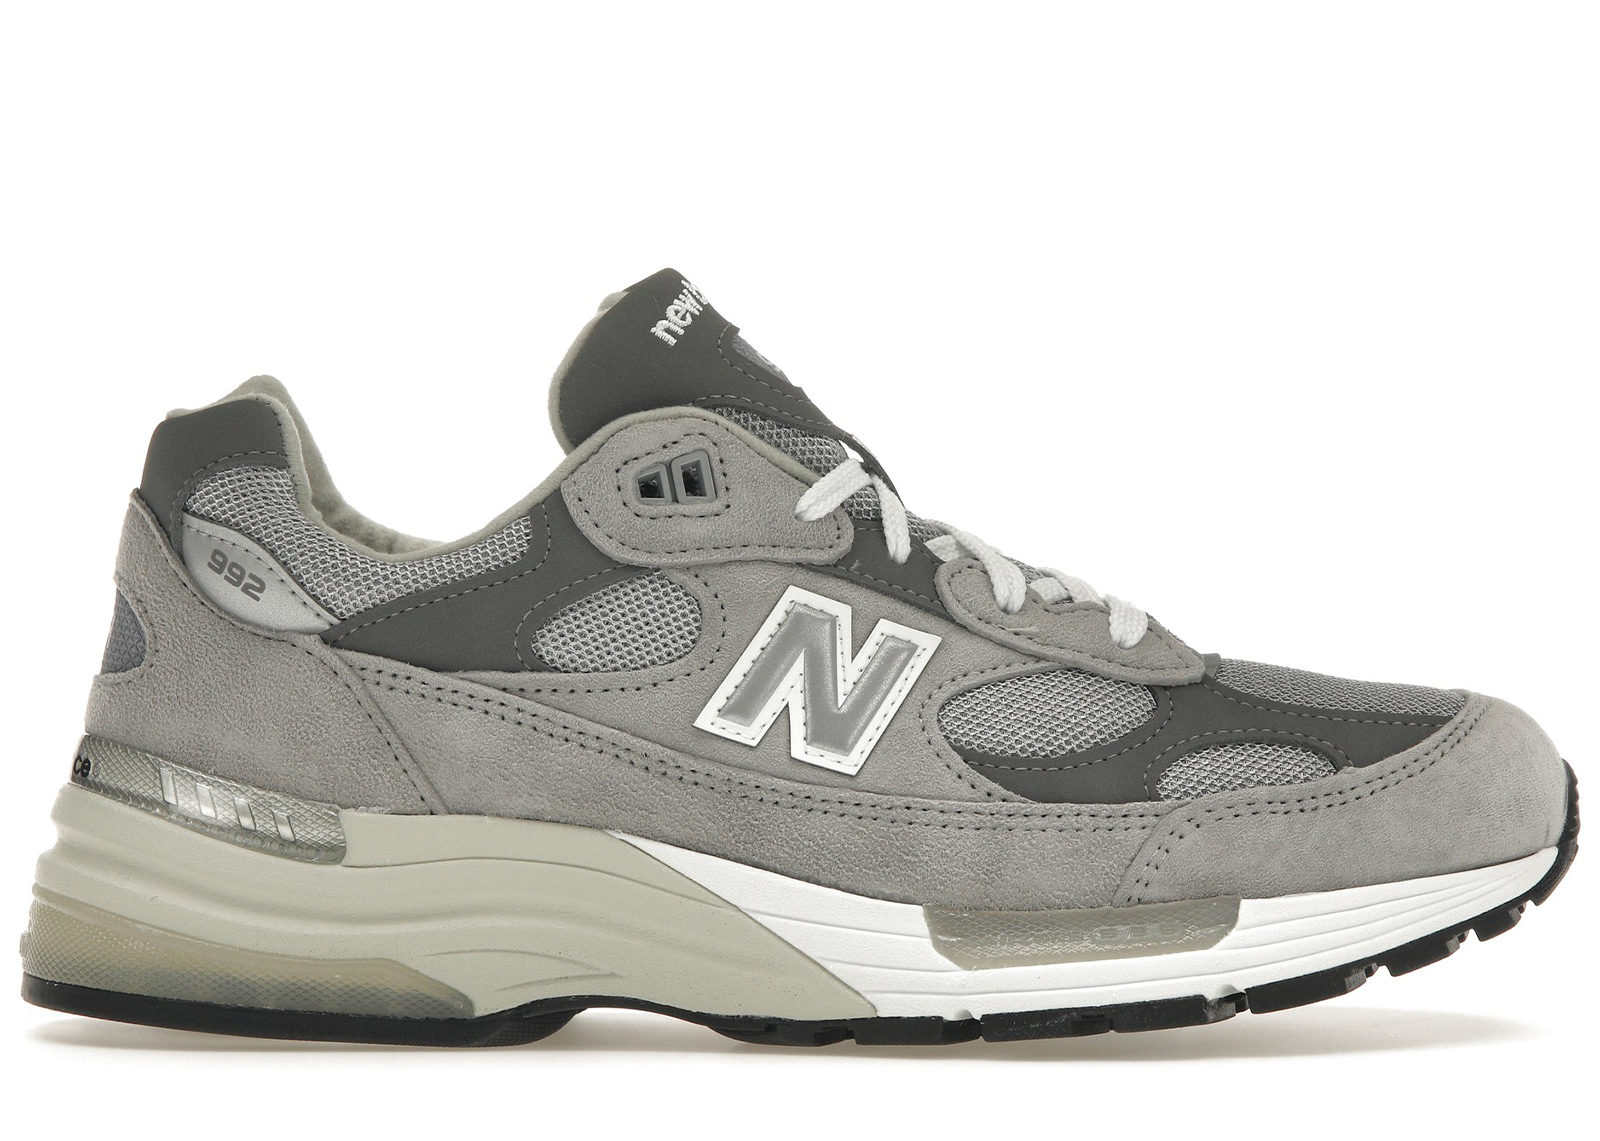 Buy New Balance 992 Shoes & New Sneakers - StockX